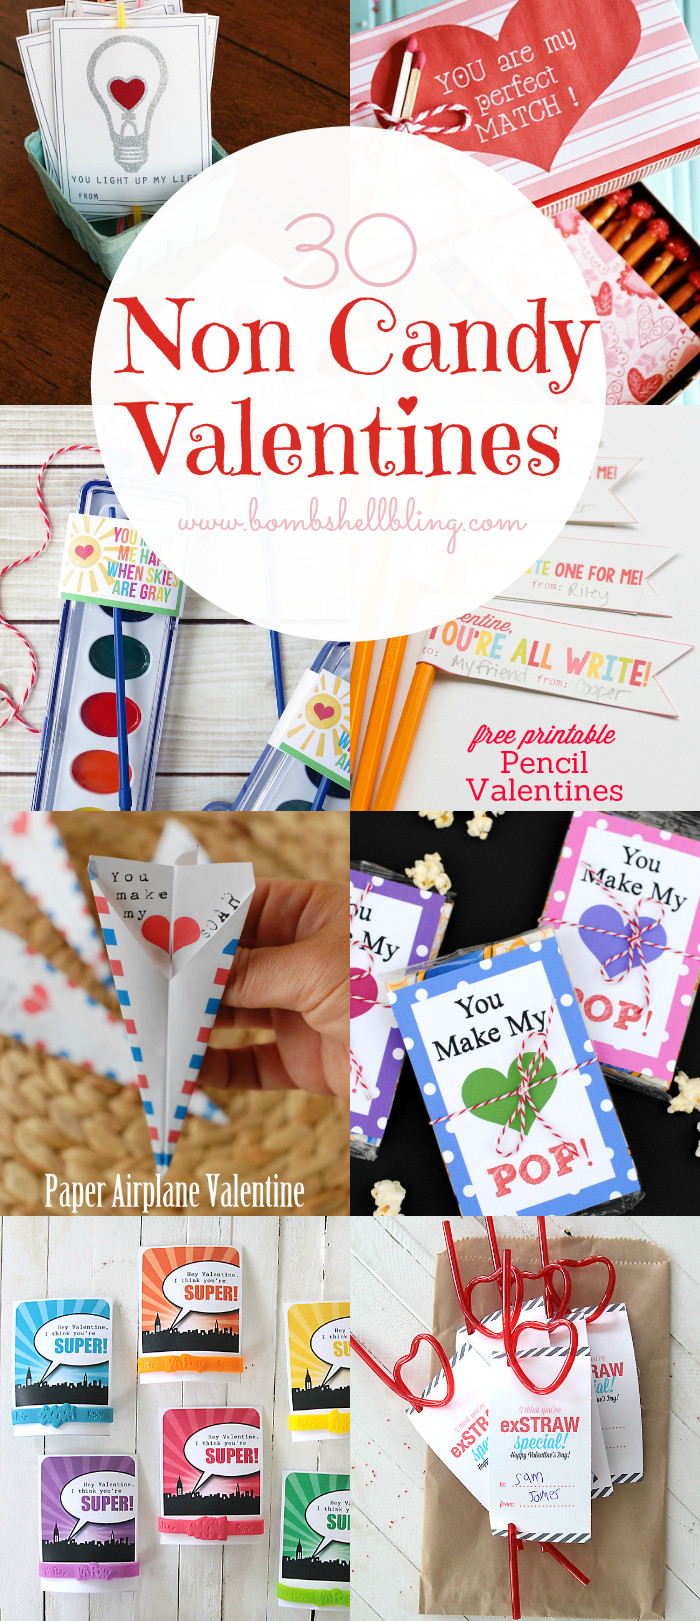 Valentines Day Ideas For School
 Non Candy Valentine Ideas & Printables Over 30 to Choose From